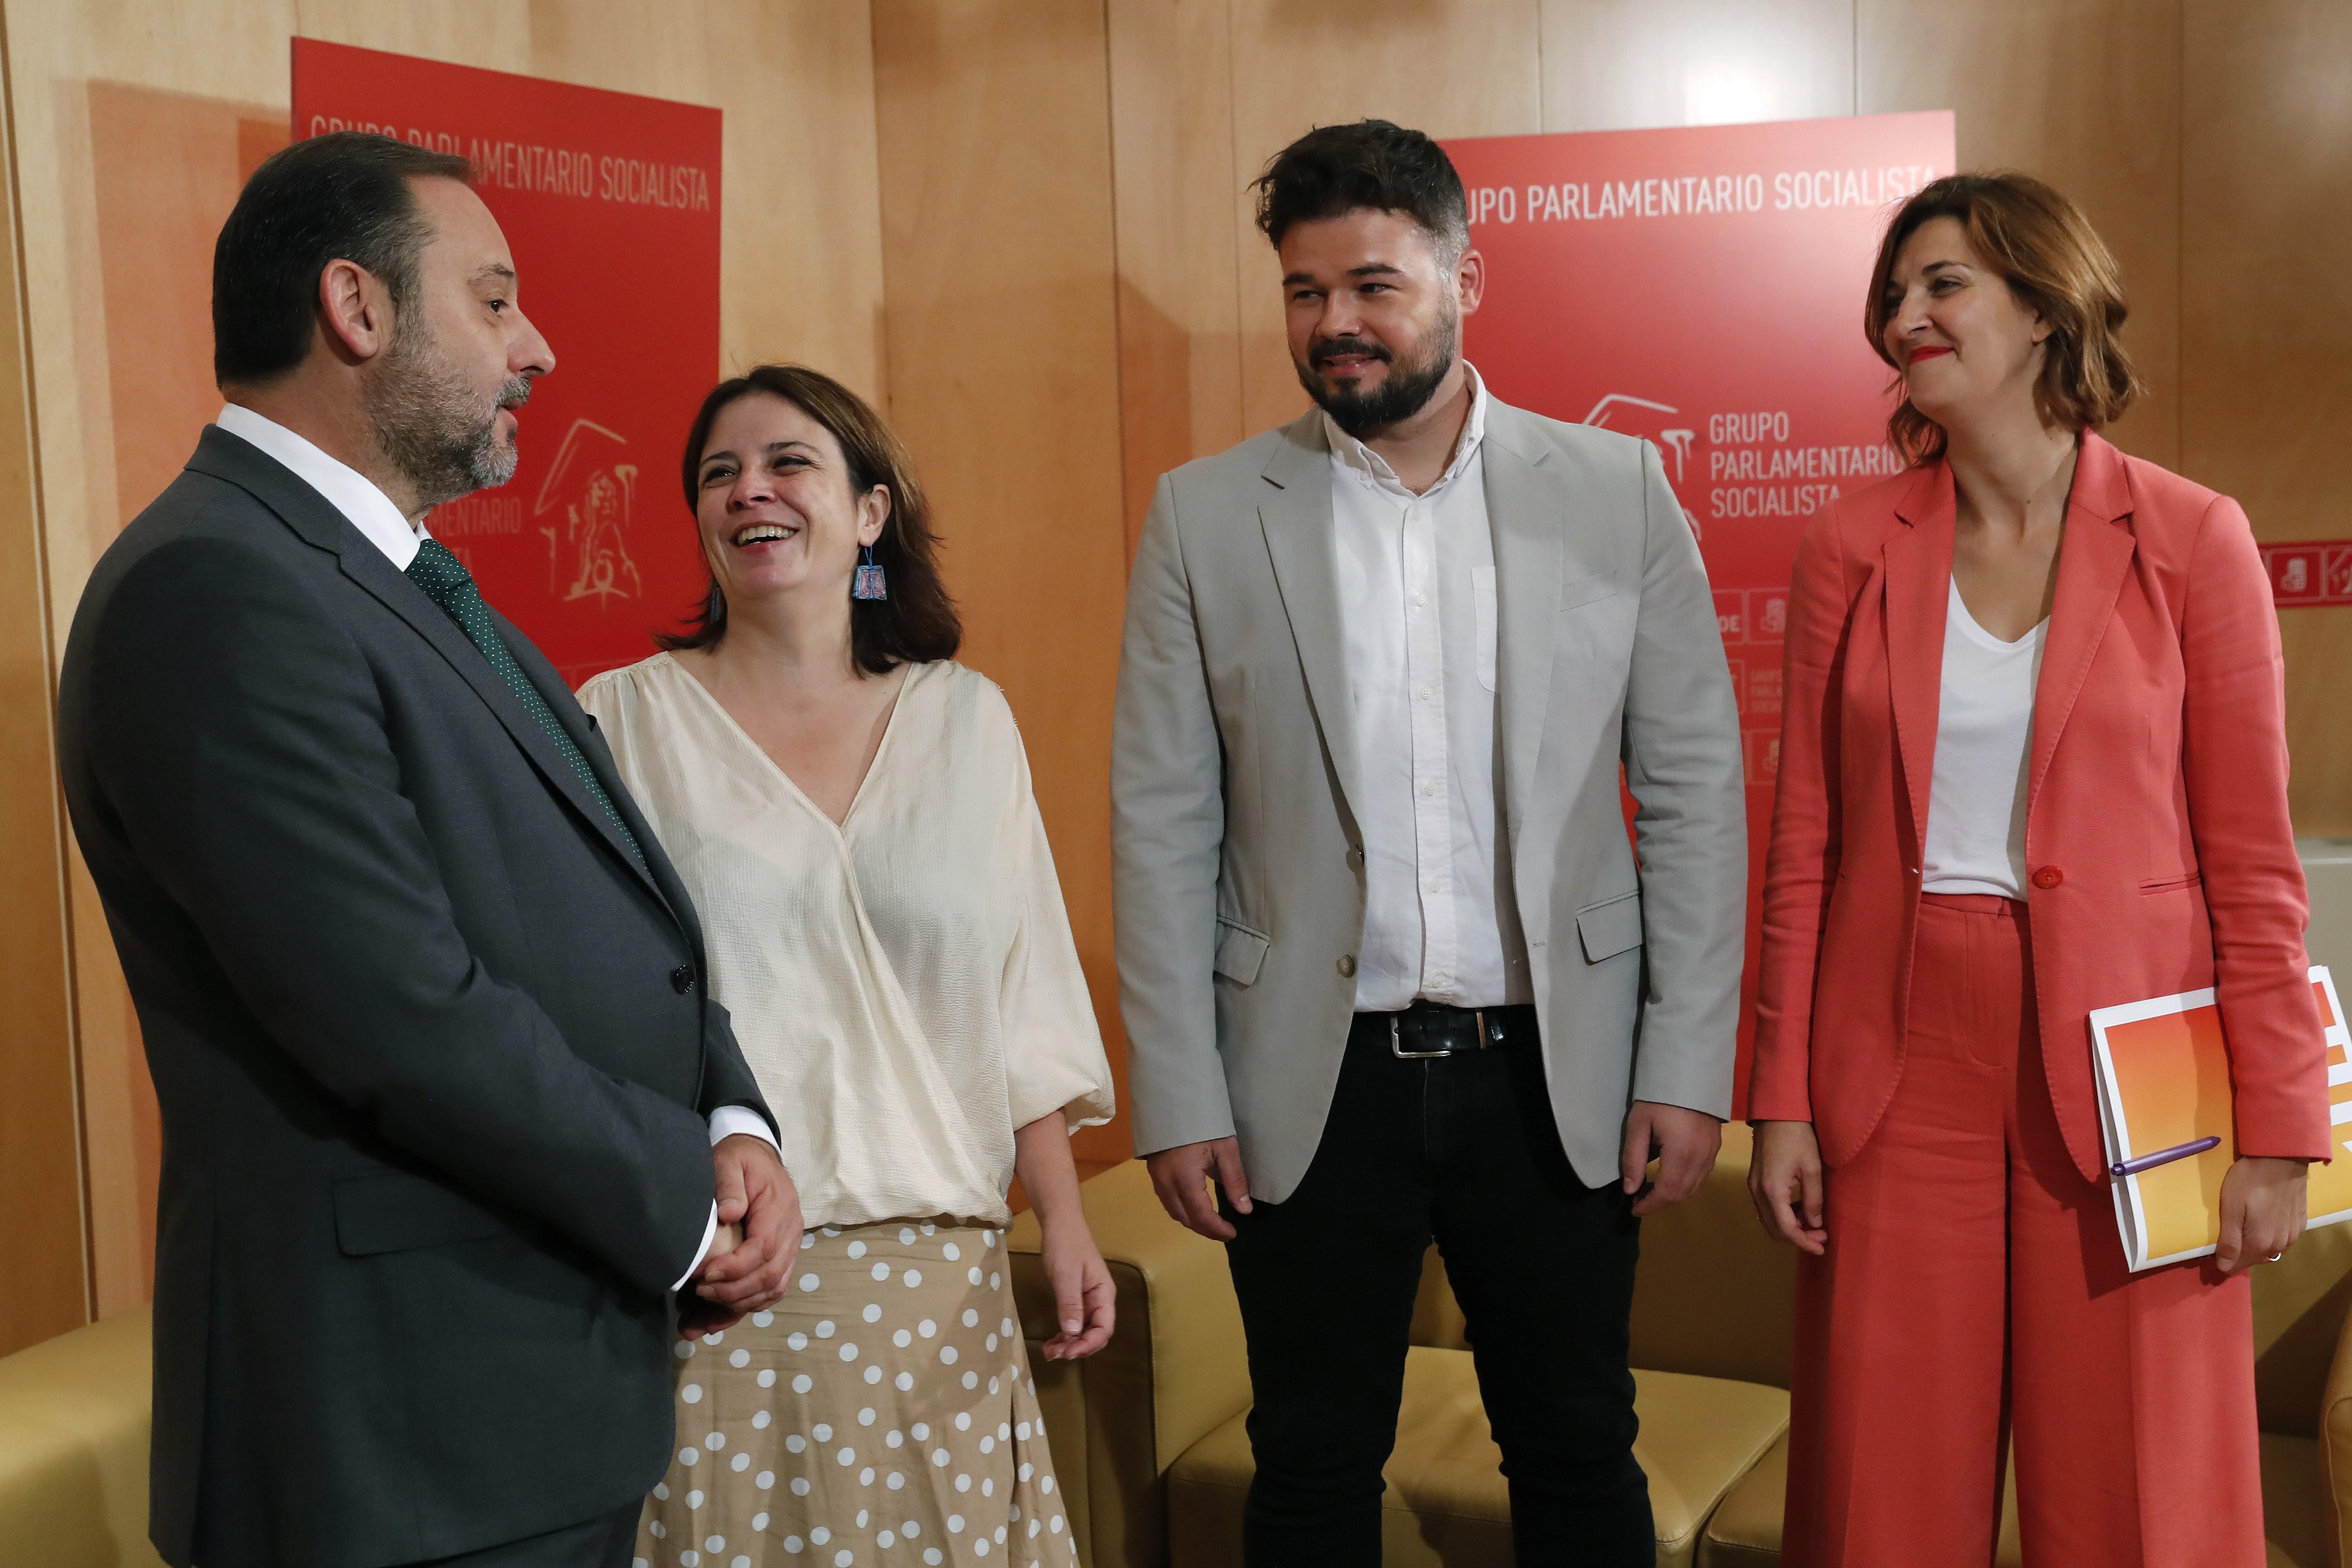 PSOE raises pressure on Podemos over investing new government